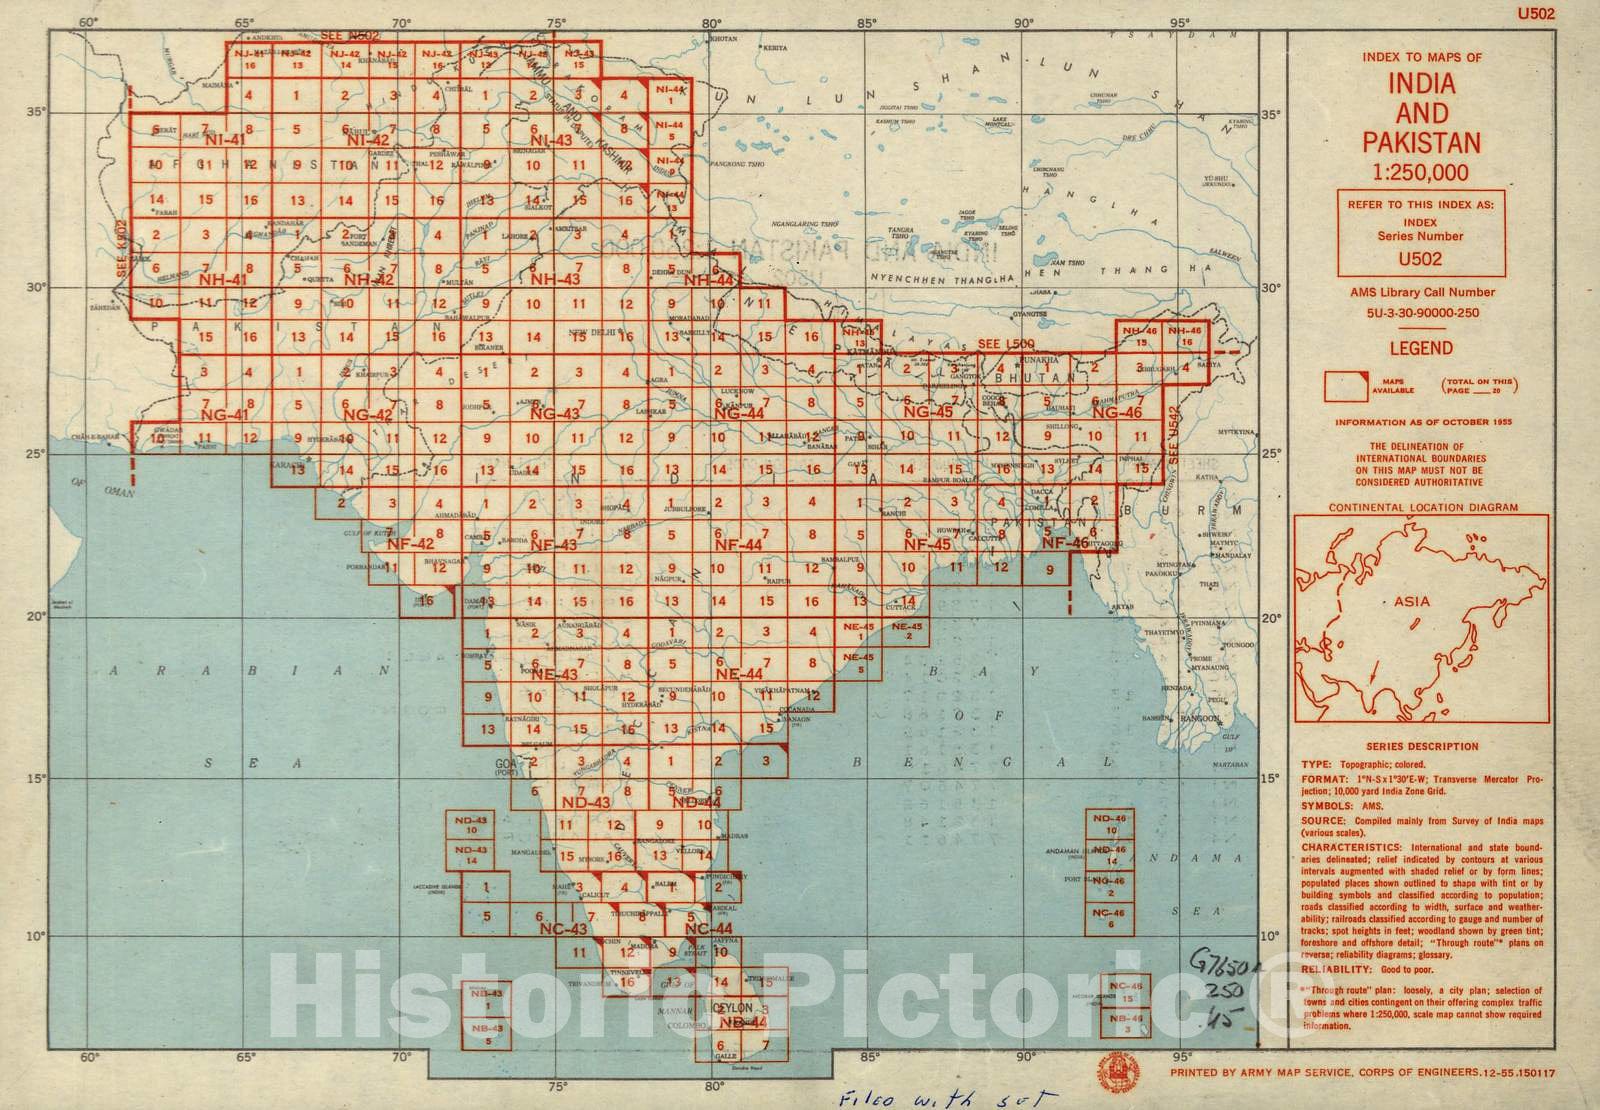 Historic 1955 Map - India and Pakistan 1:250,000. - Image 314 of 314 maps